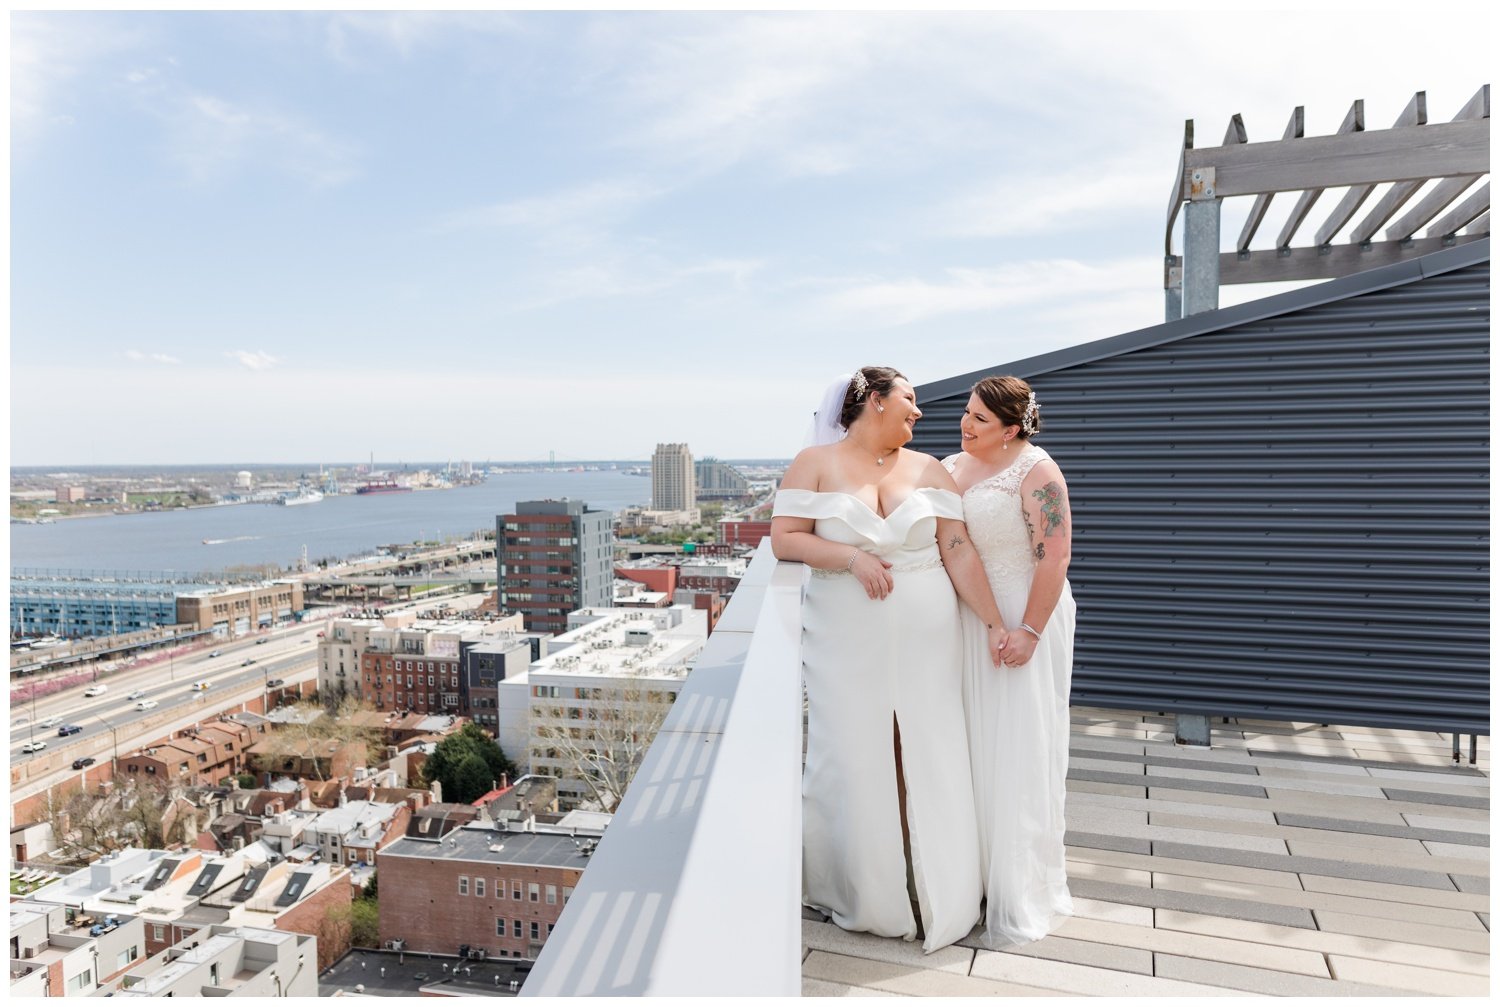 Race-Street-Pier-and-Yards-Brewing-Compnay-Philly-LGBT-Wedding-11.jpg